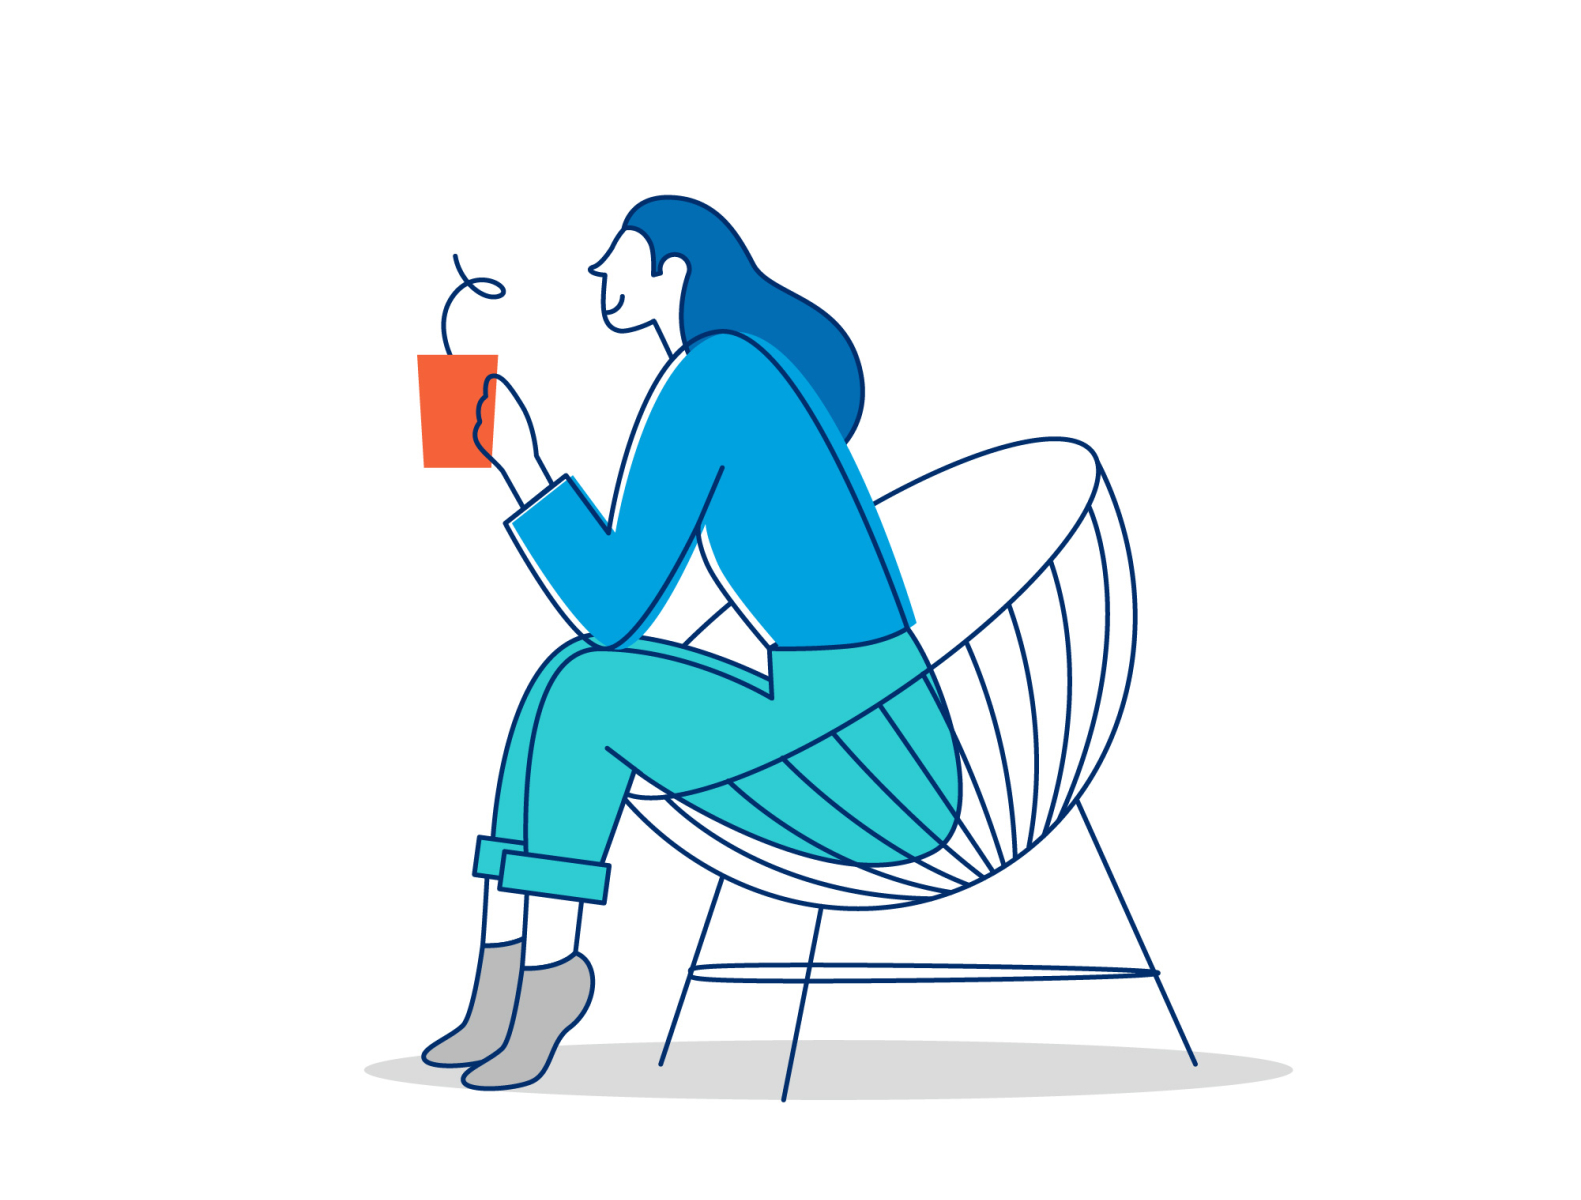 Co-operators - Lady drinking coffee. by Coque on Dribbble